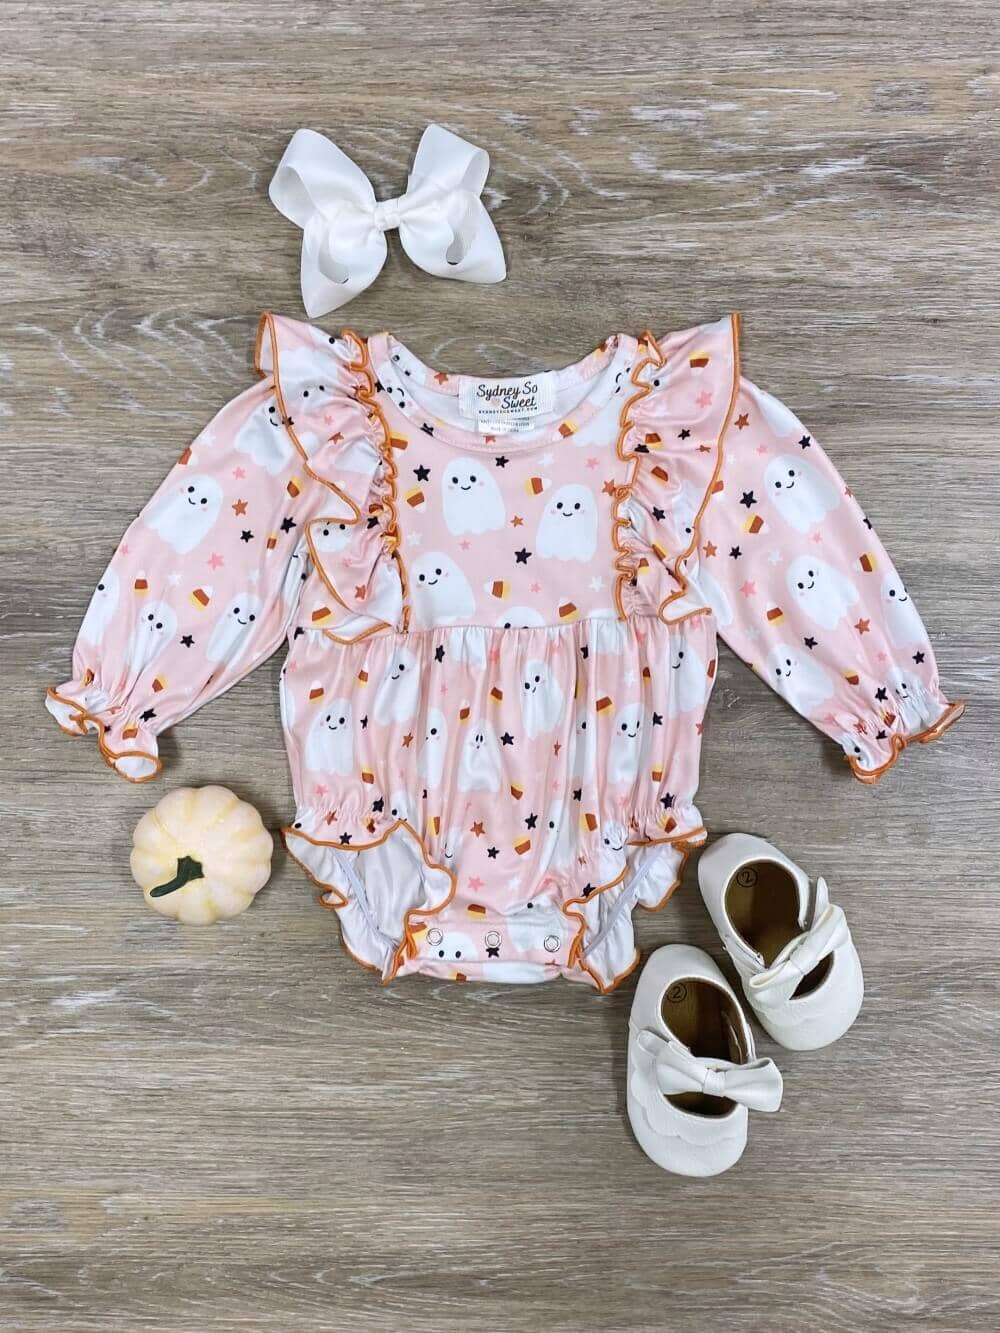 Cute Baby Boutique Outfits, Babygirl Styles, Ships from Ohio